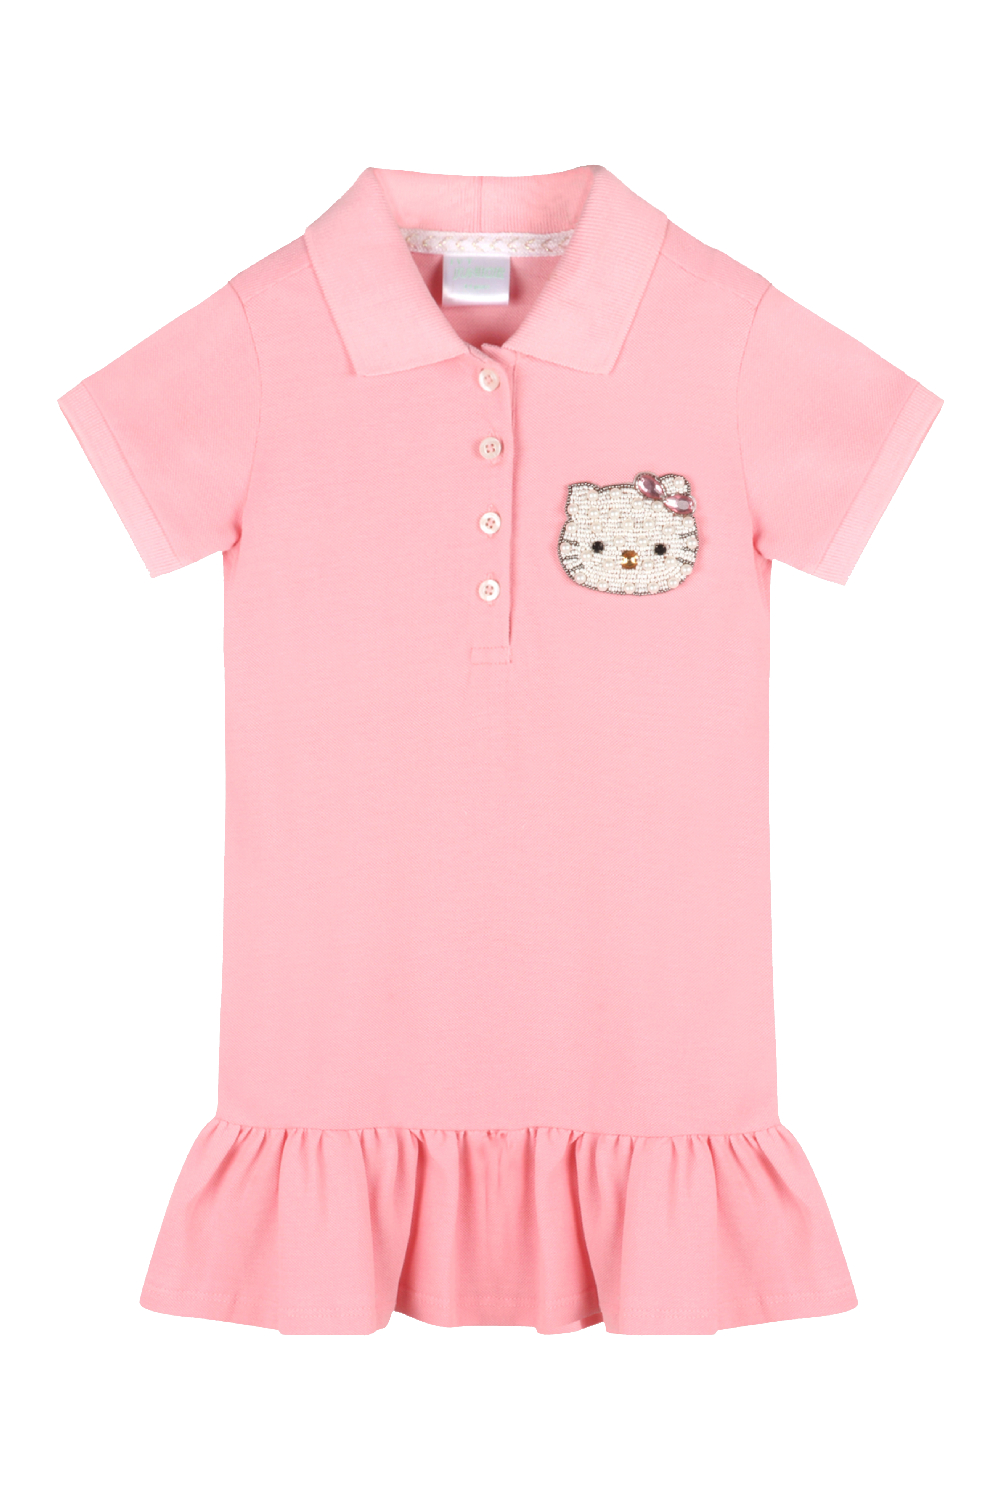 Girls Polo Dress With Ruffles At Hem And Hello Kitty Motif